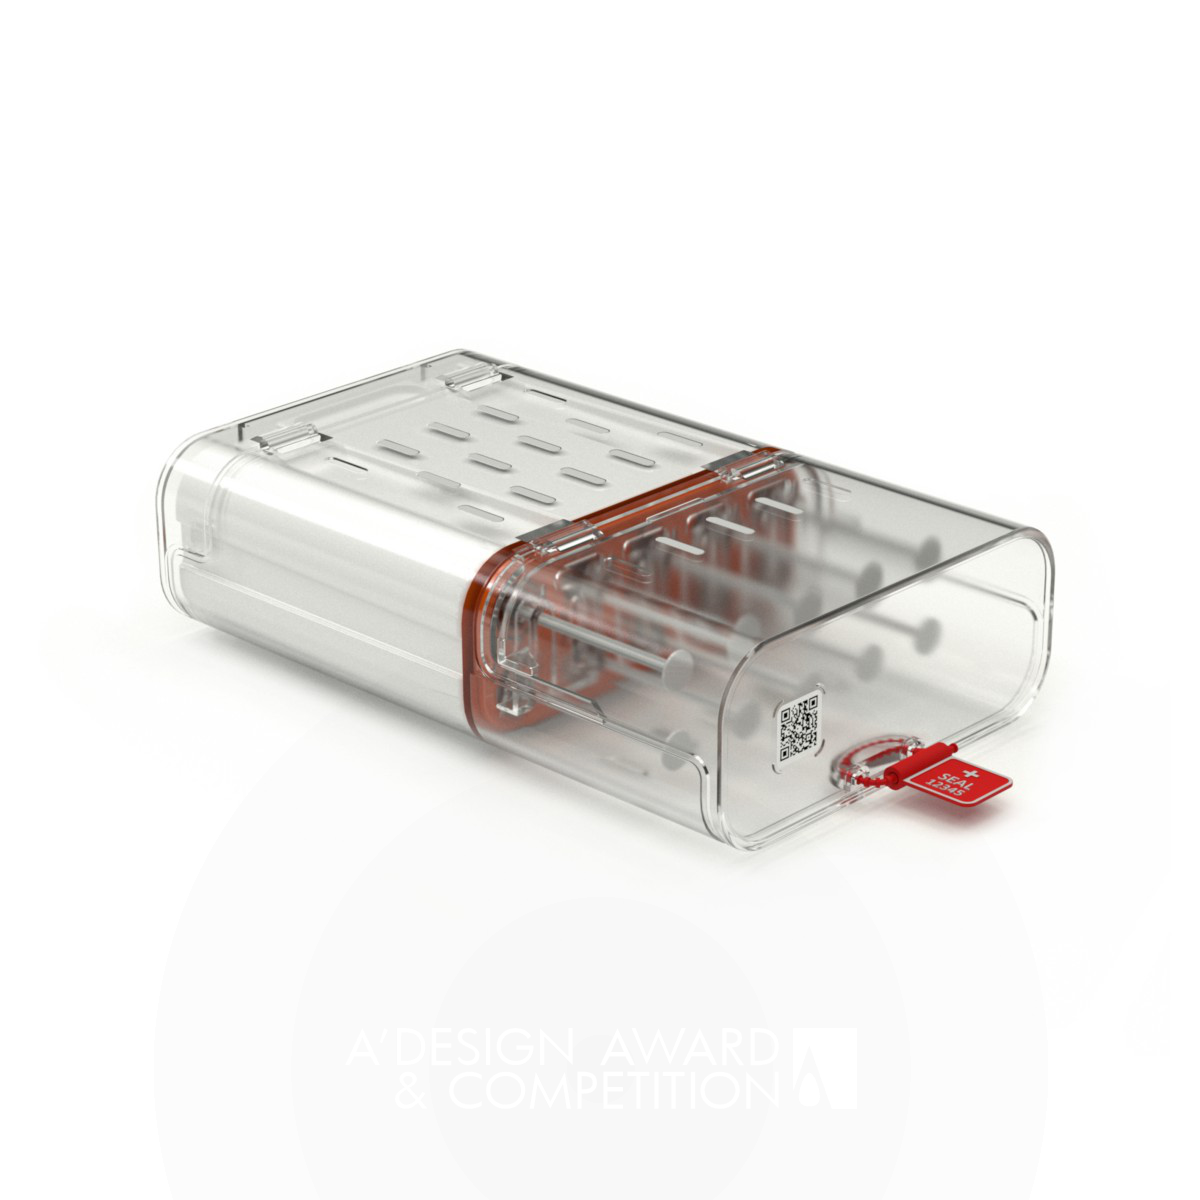 Esc Syringes Transport Container by Eric Lalande